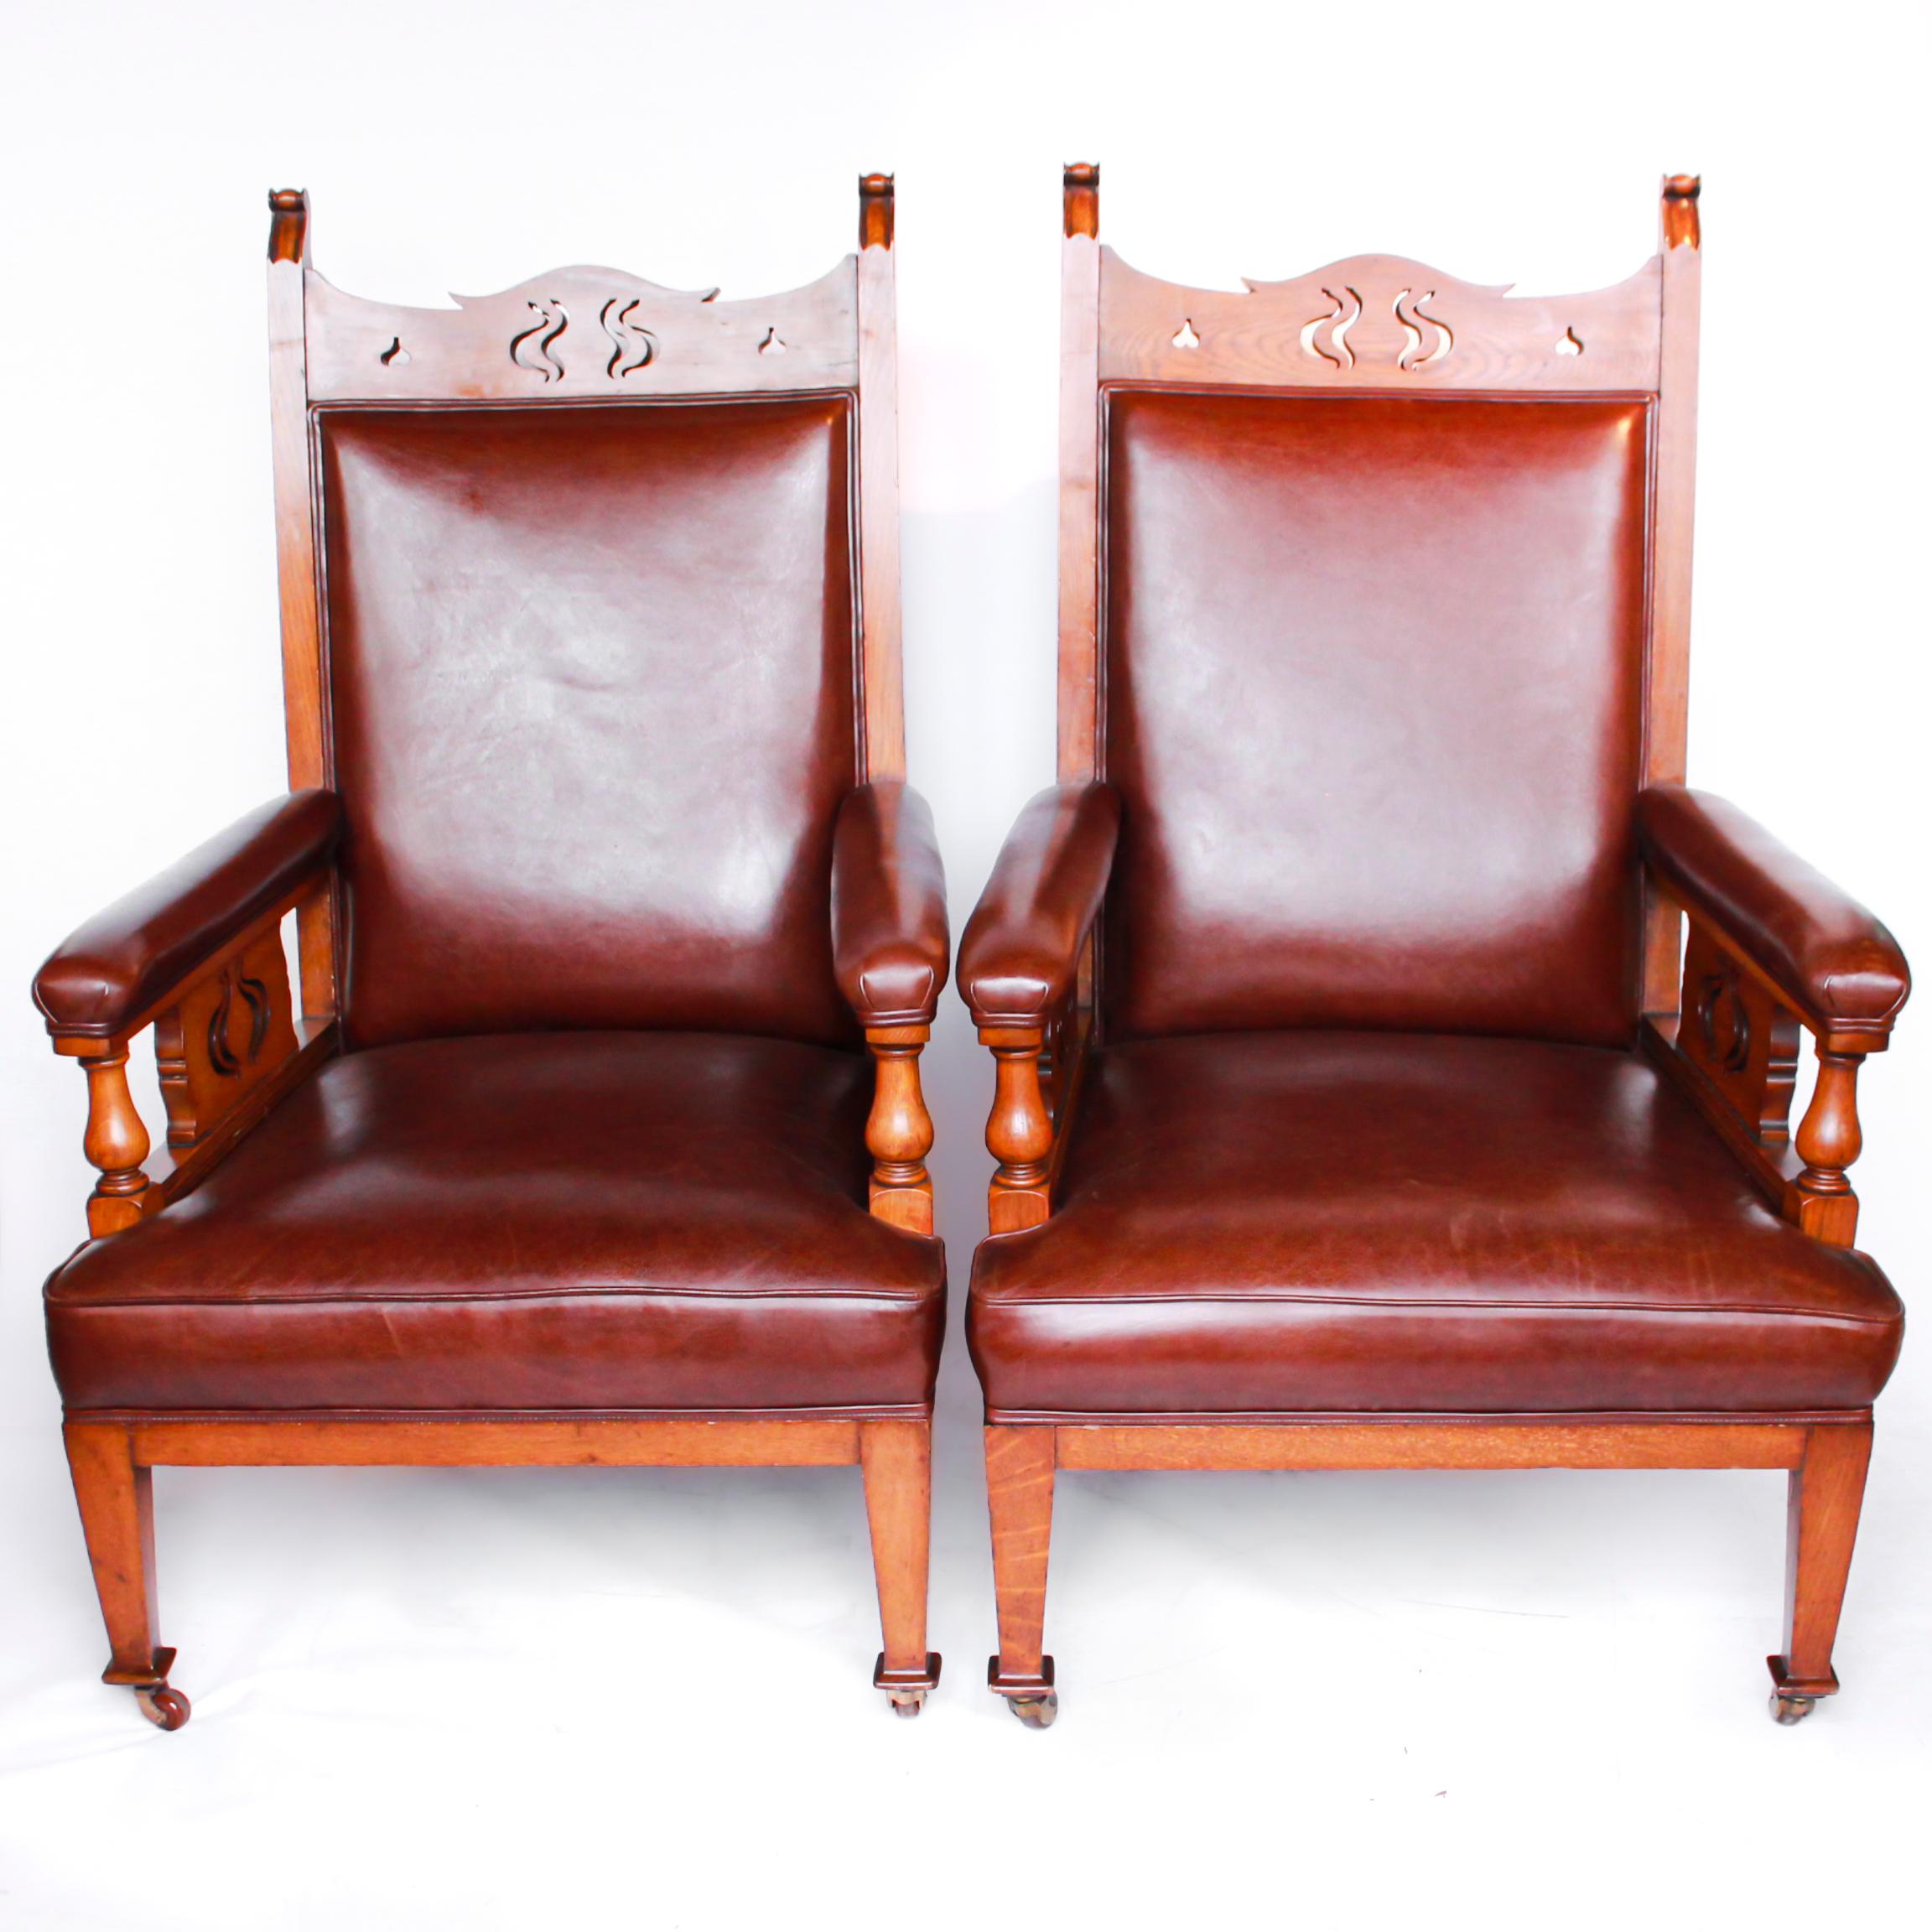 A pair of Arts & Crafts library chairs attributed to Liberty & Co. Solid oak frame. Carved detail to top and sides. Upholstered in Chestnut leather. 

Dimensions: H 103cm, W 56cm, seat D 66cm

Origin: English

Date: circa 1910

Item no: